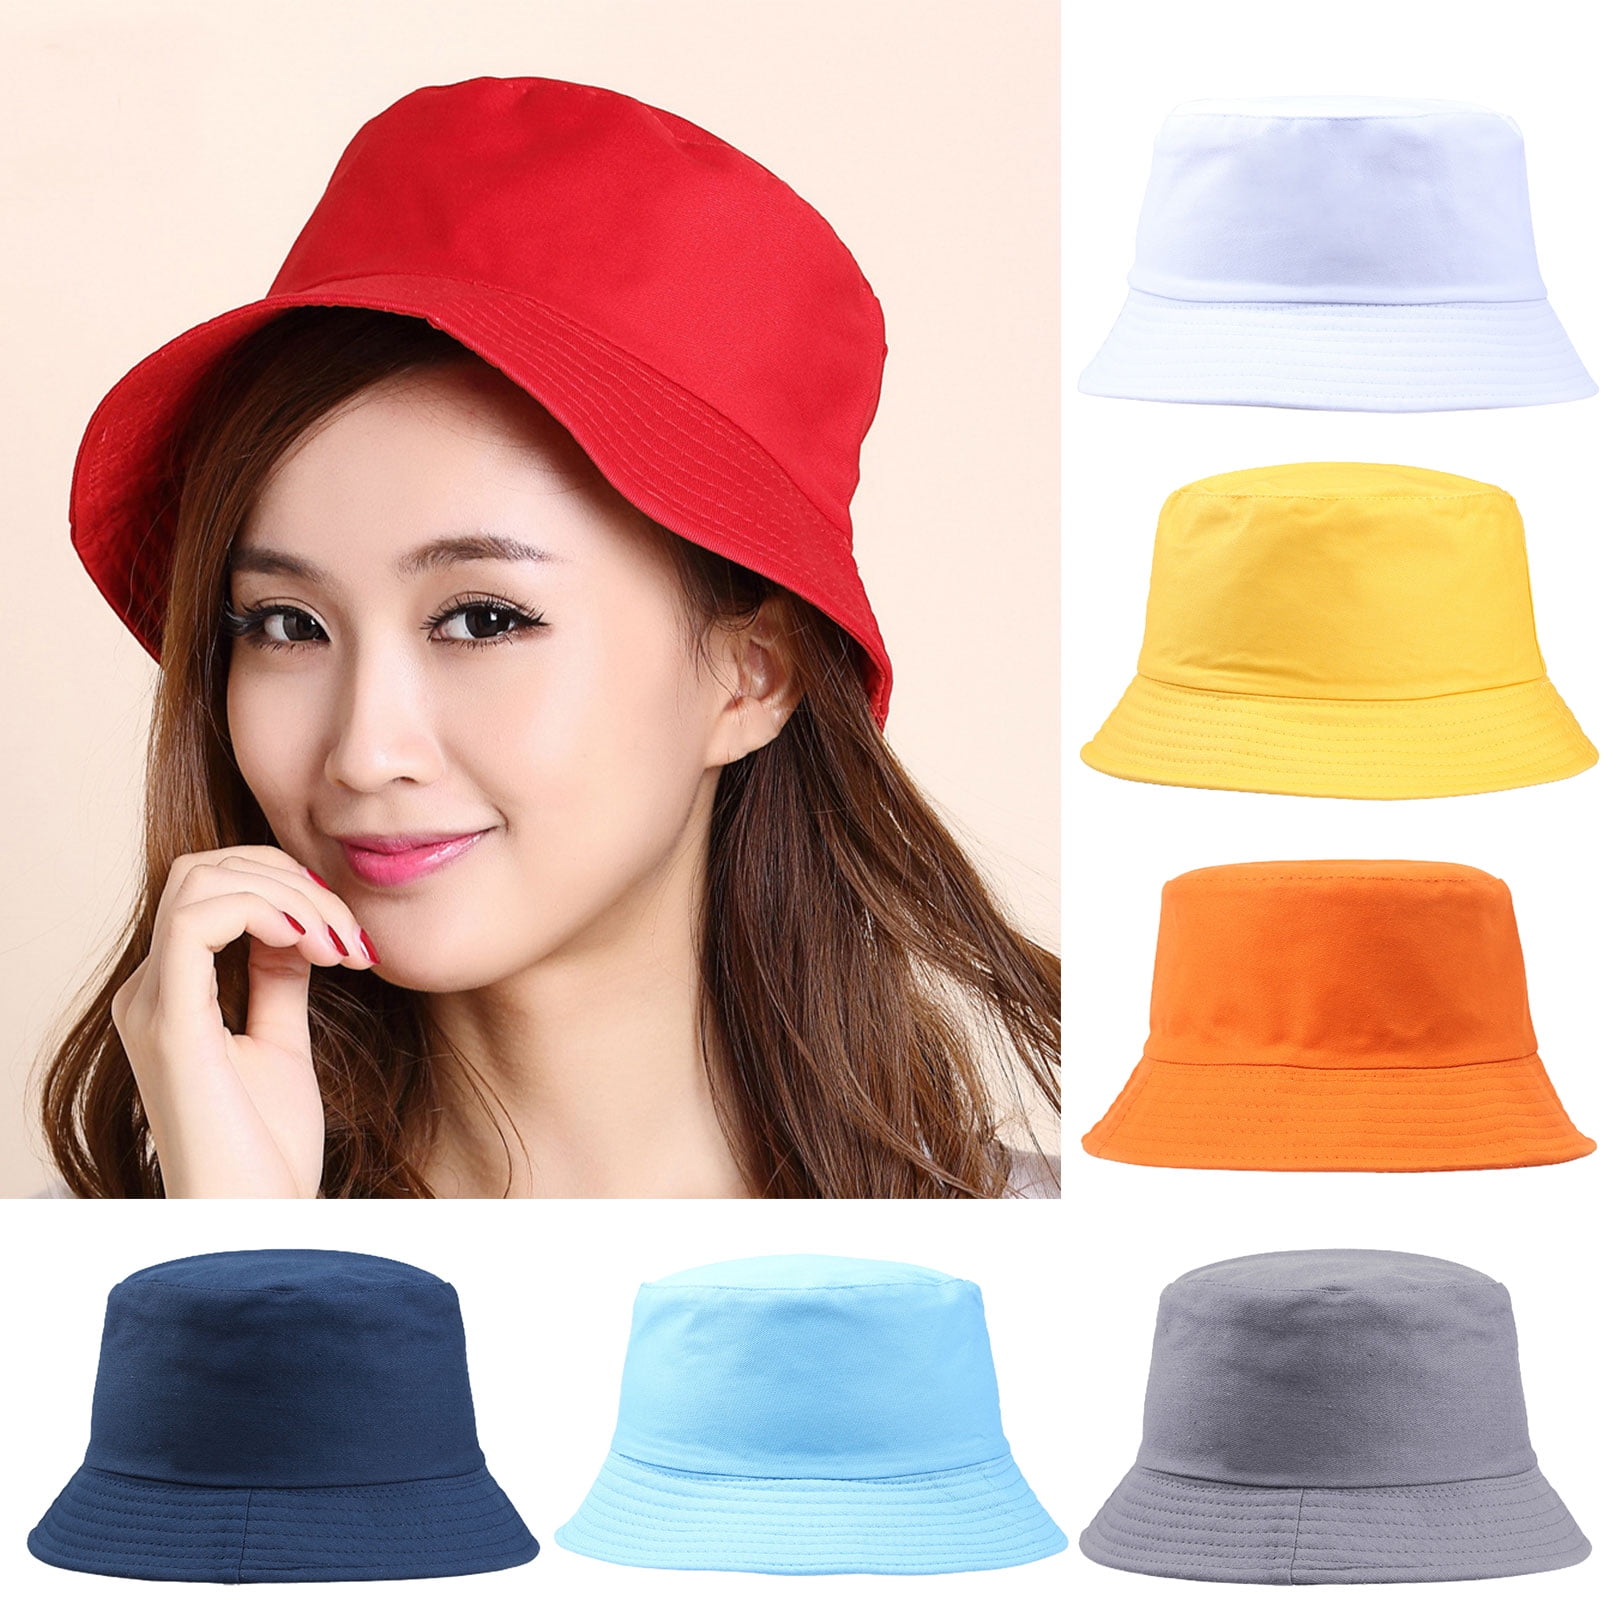 Women and Men with Customize Top Packable Fisherman Cap for Outdoor Travel Teens Flower Unique Floral Plant New Summer Unisex Cotton Fashion Fishing Sun Bucket Hats for Kid 